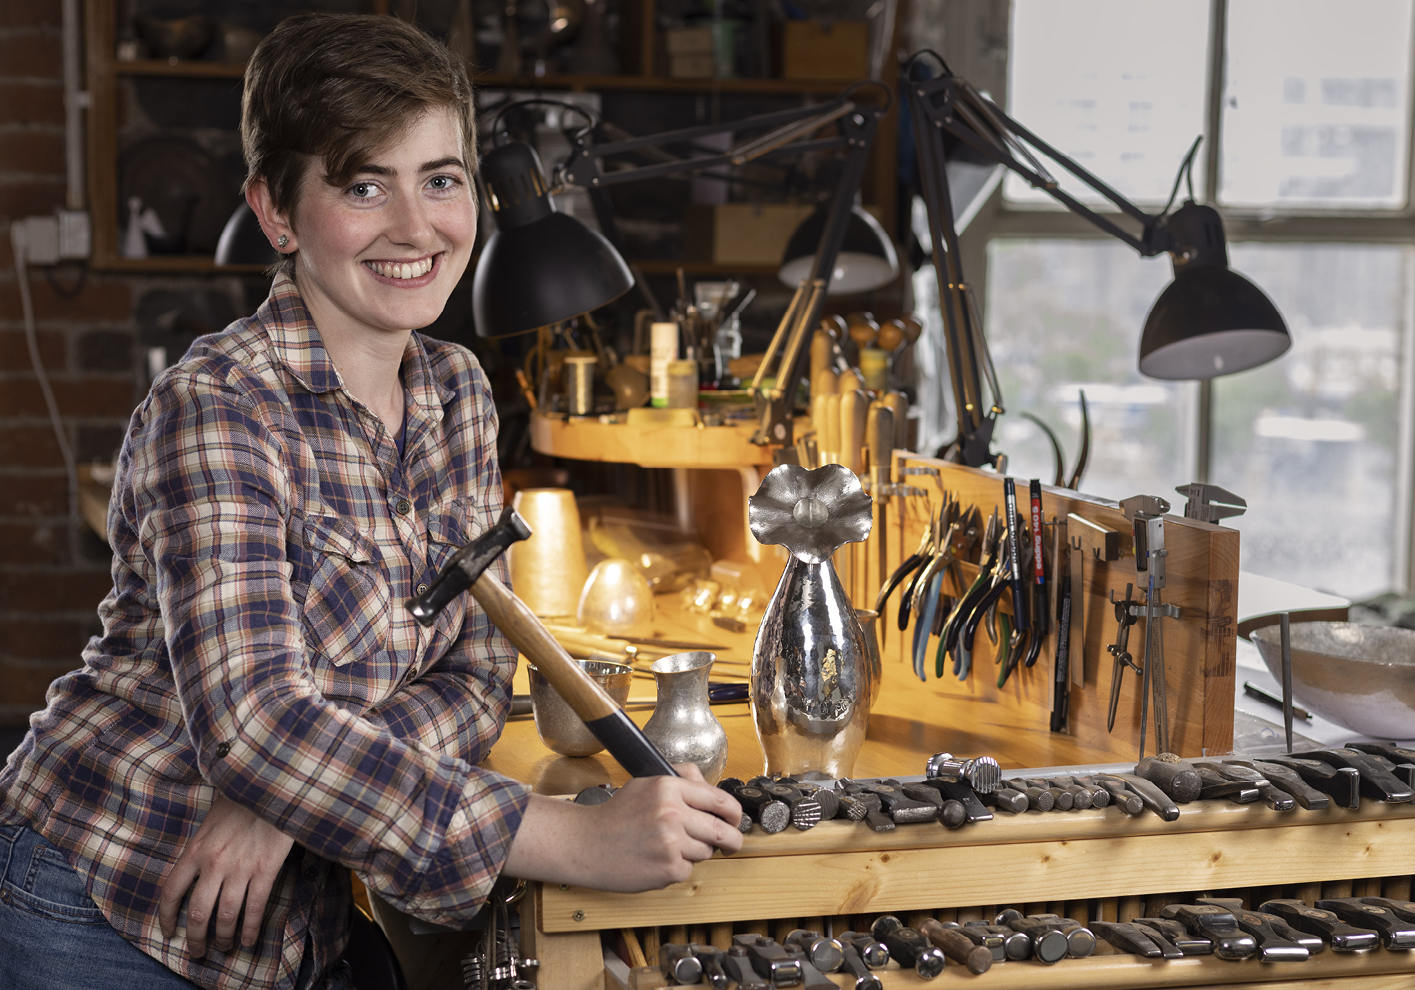 Specialising in silversmithing, Claire Mooney was paired up with Seamus Gill during the Homo Faber Fellowship programme